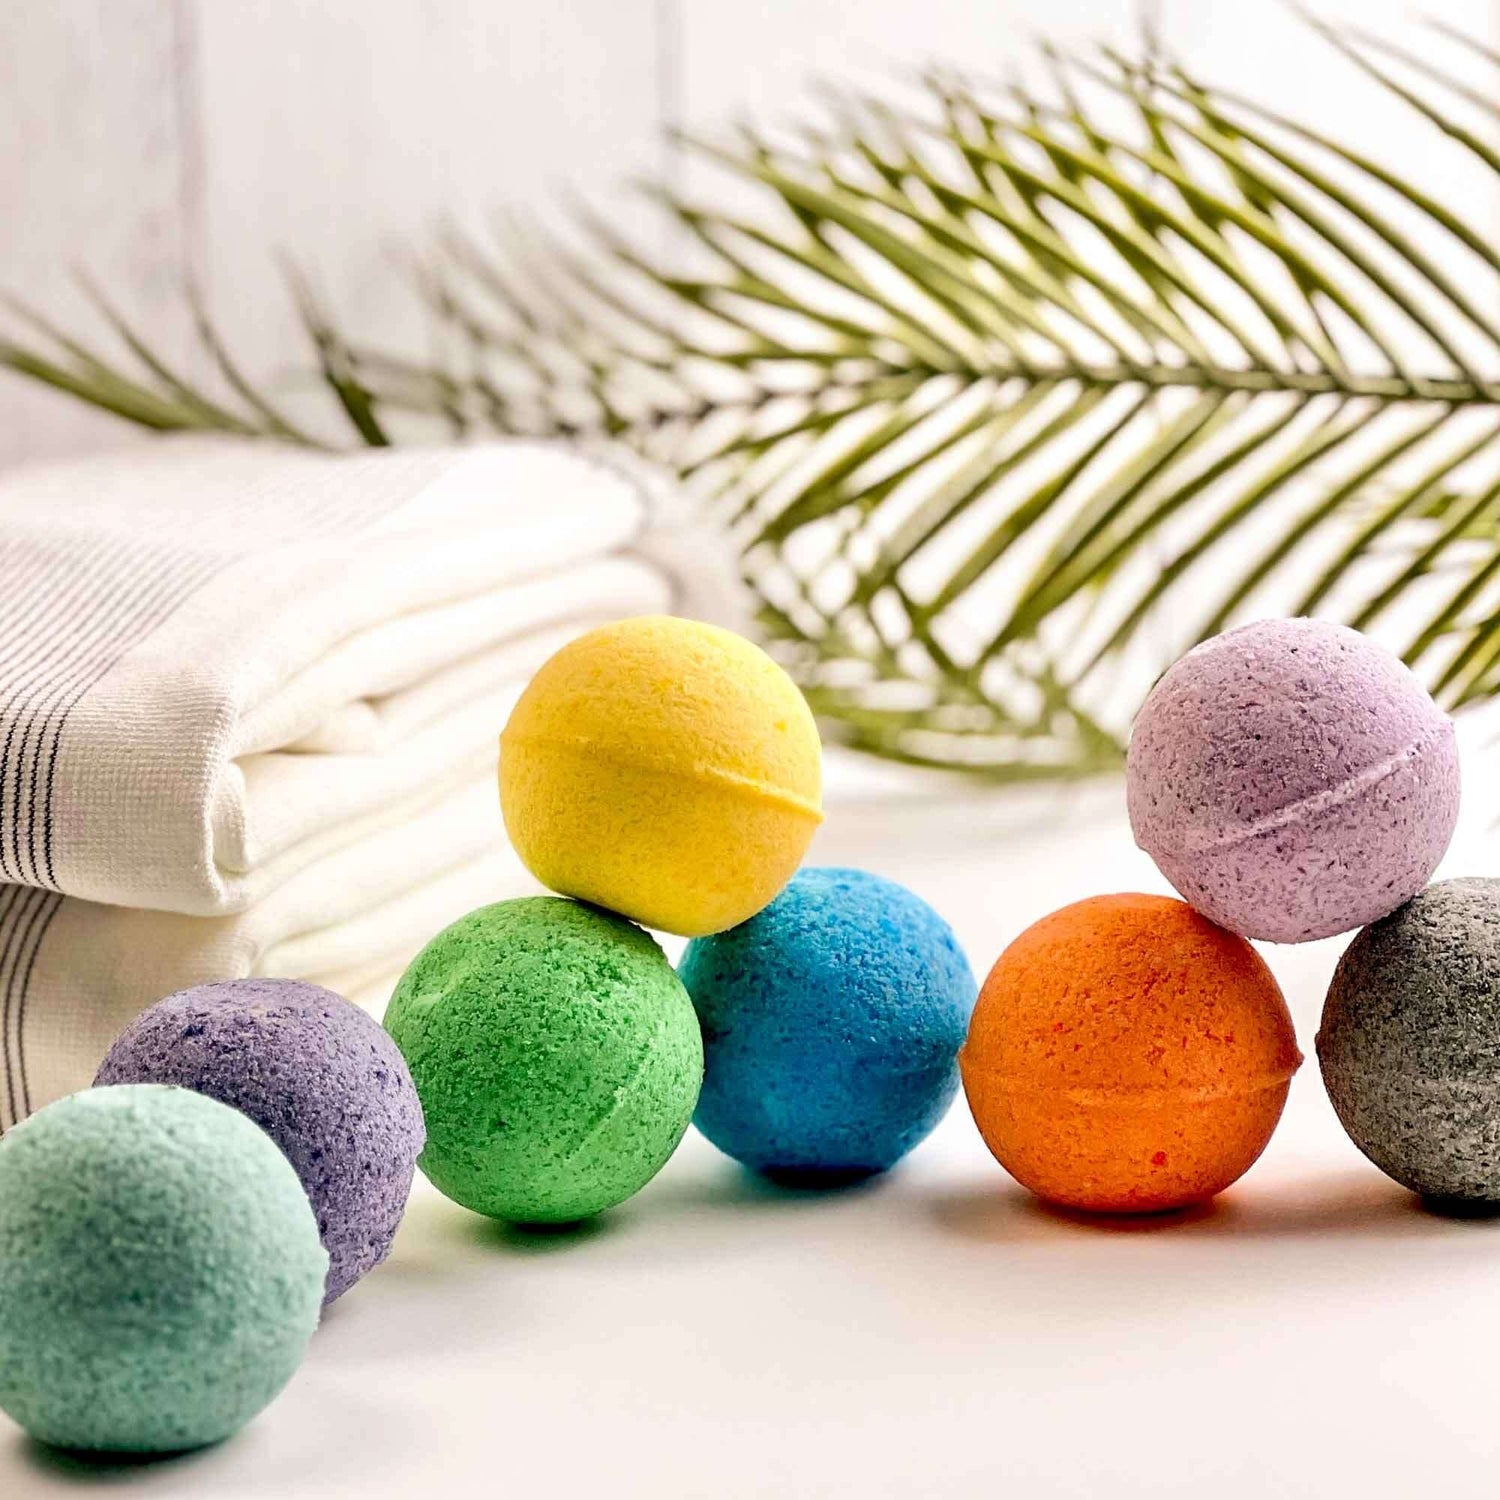 Relax and Unwind with Our Lavender Driftwood Bath Bombs - Handmade with All-Natural Ingredients